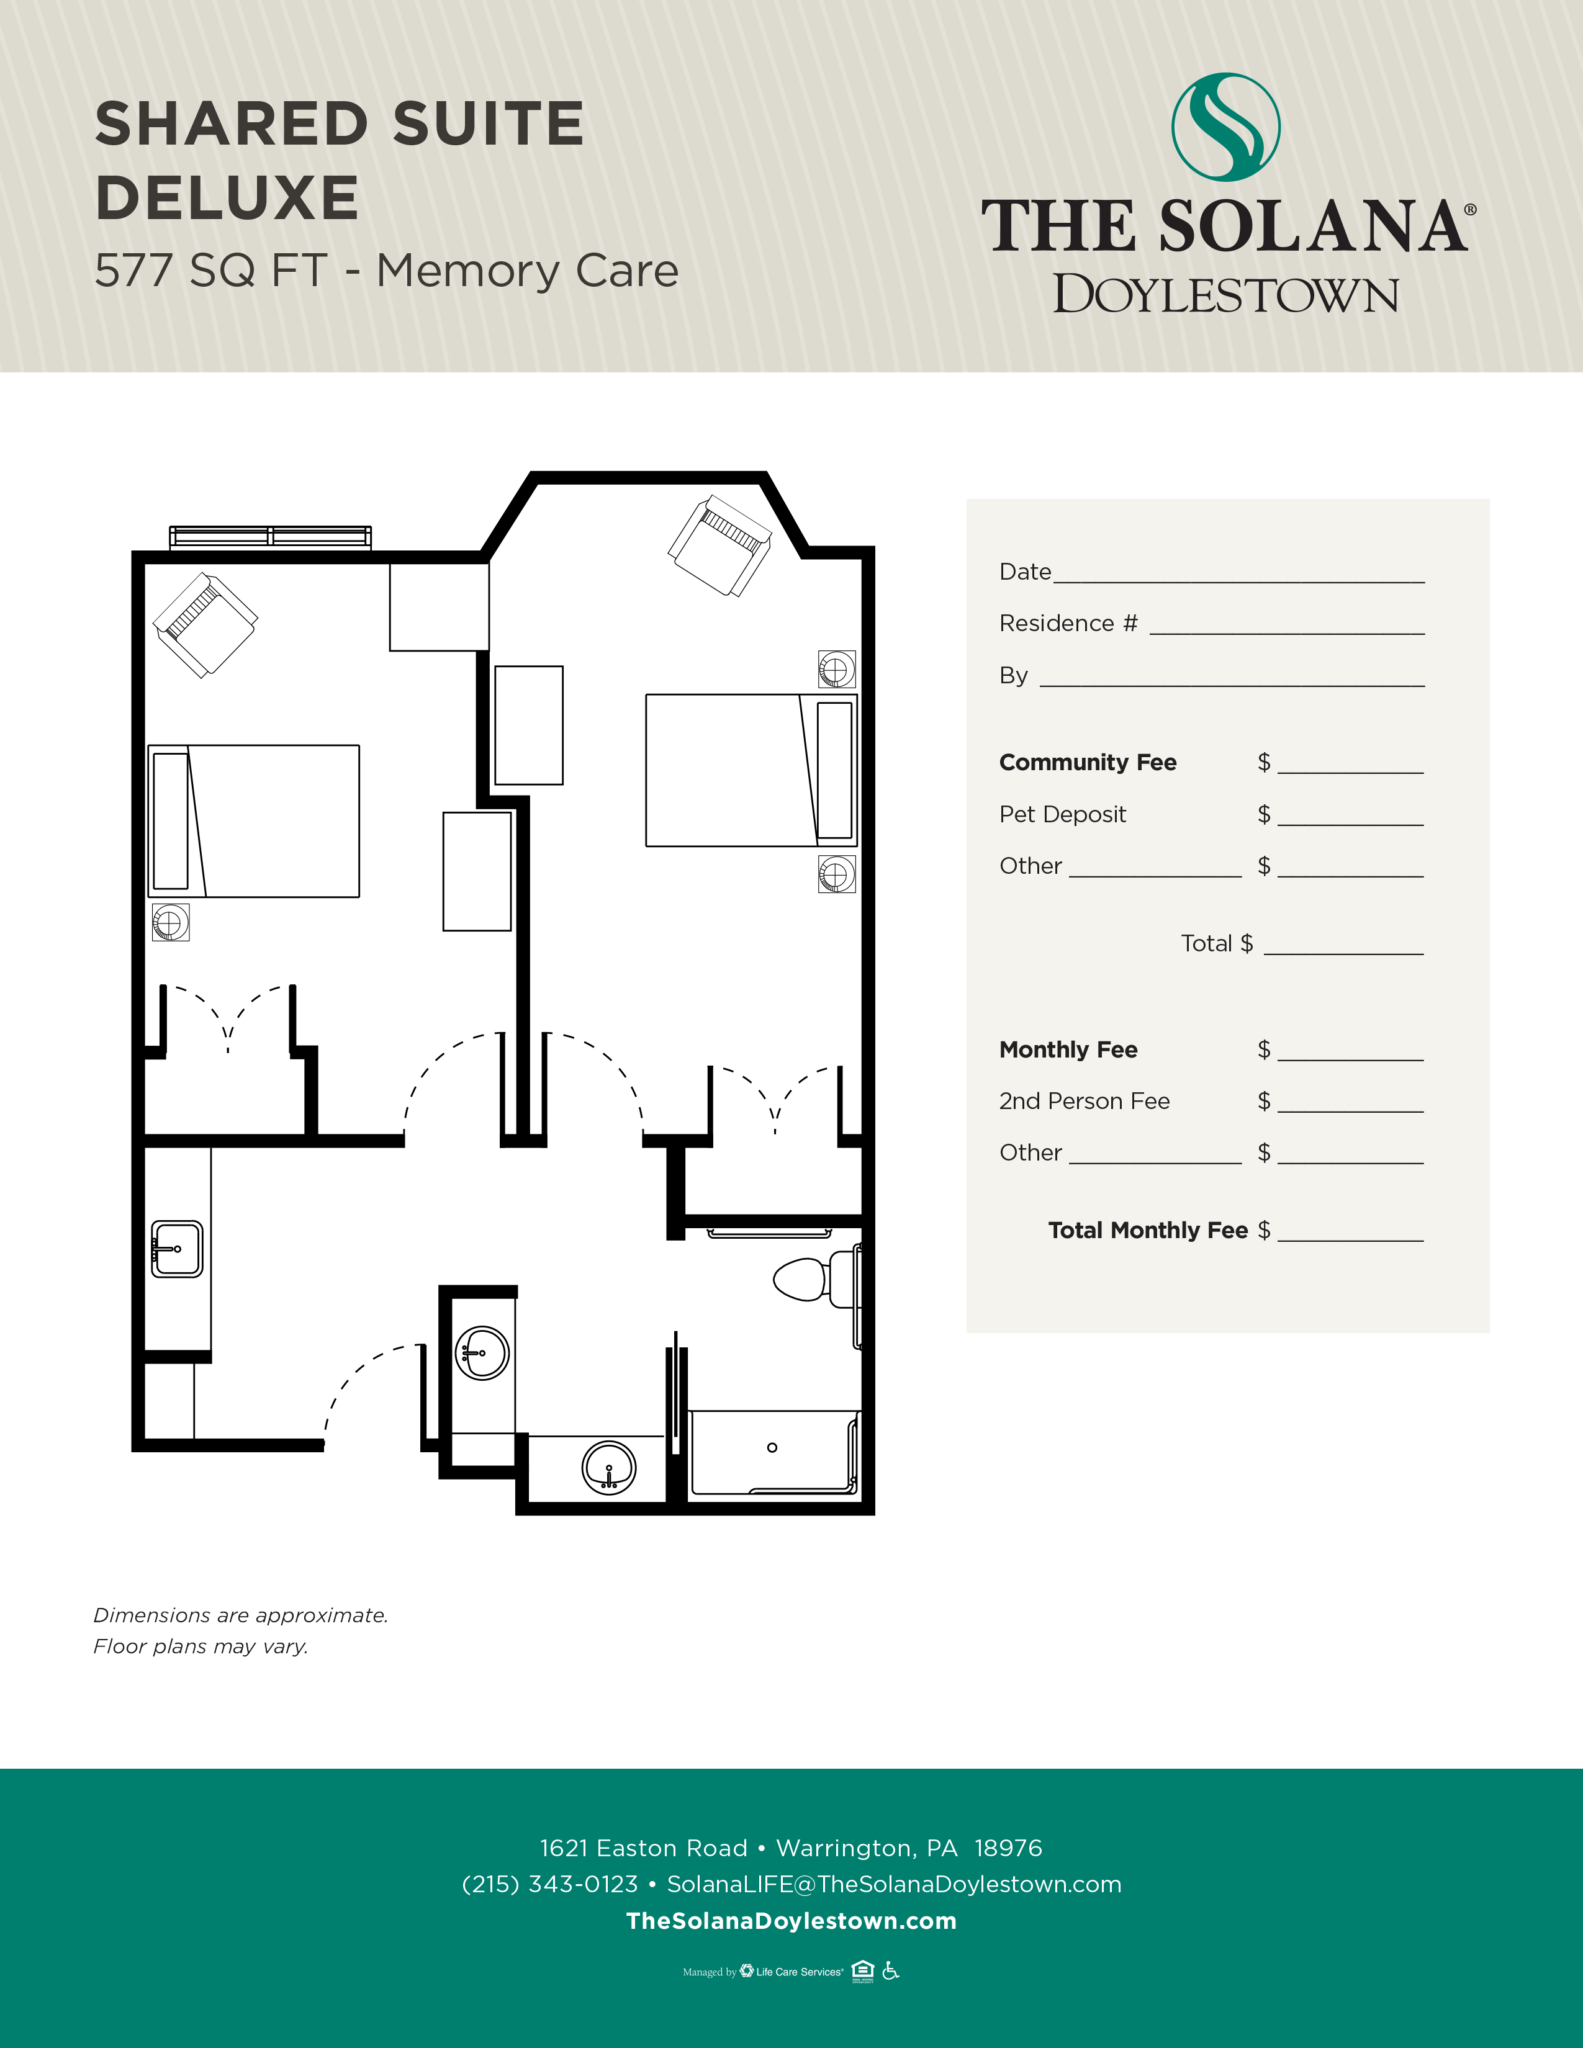 Floor plan for shared suite deluxe unit, 577 square feet, memory care at The Solana Doylestown.